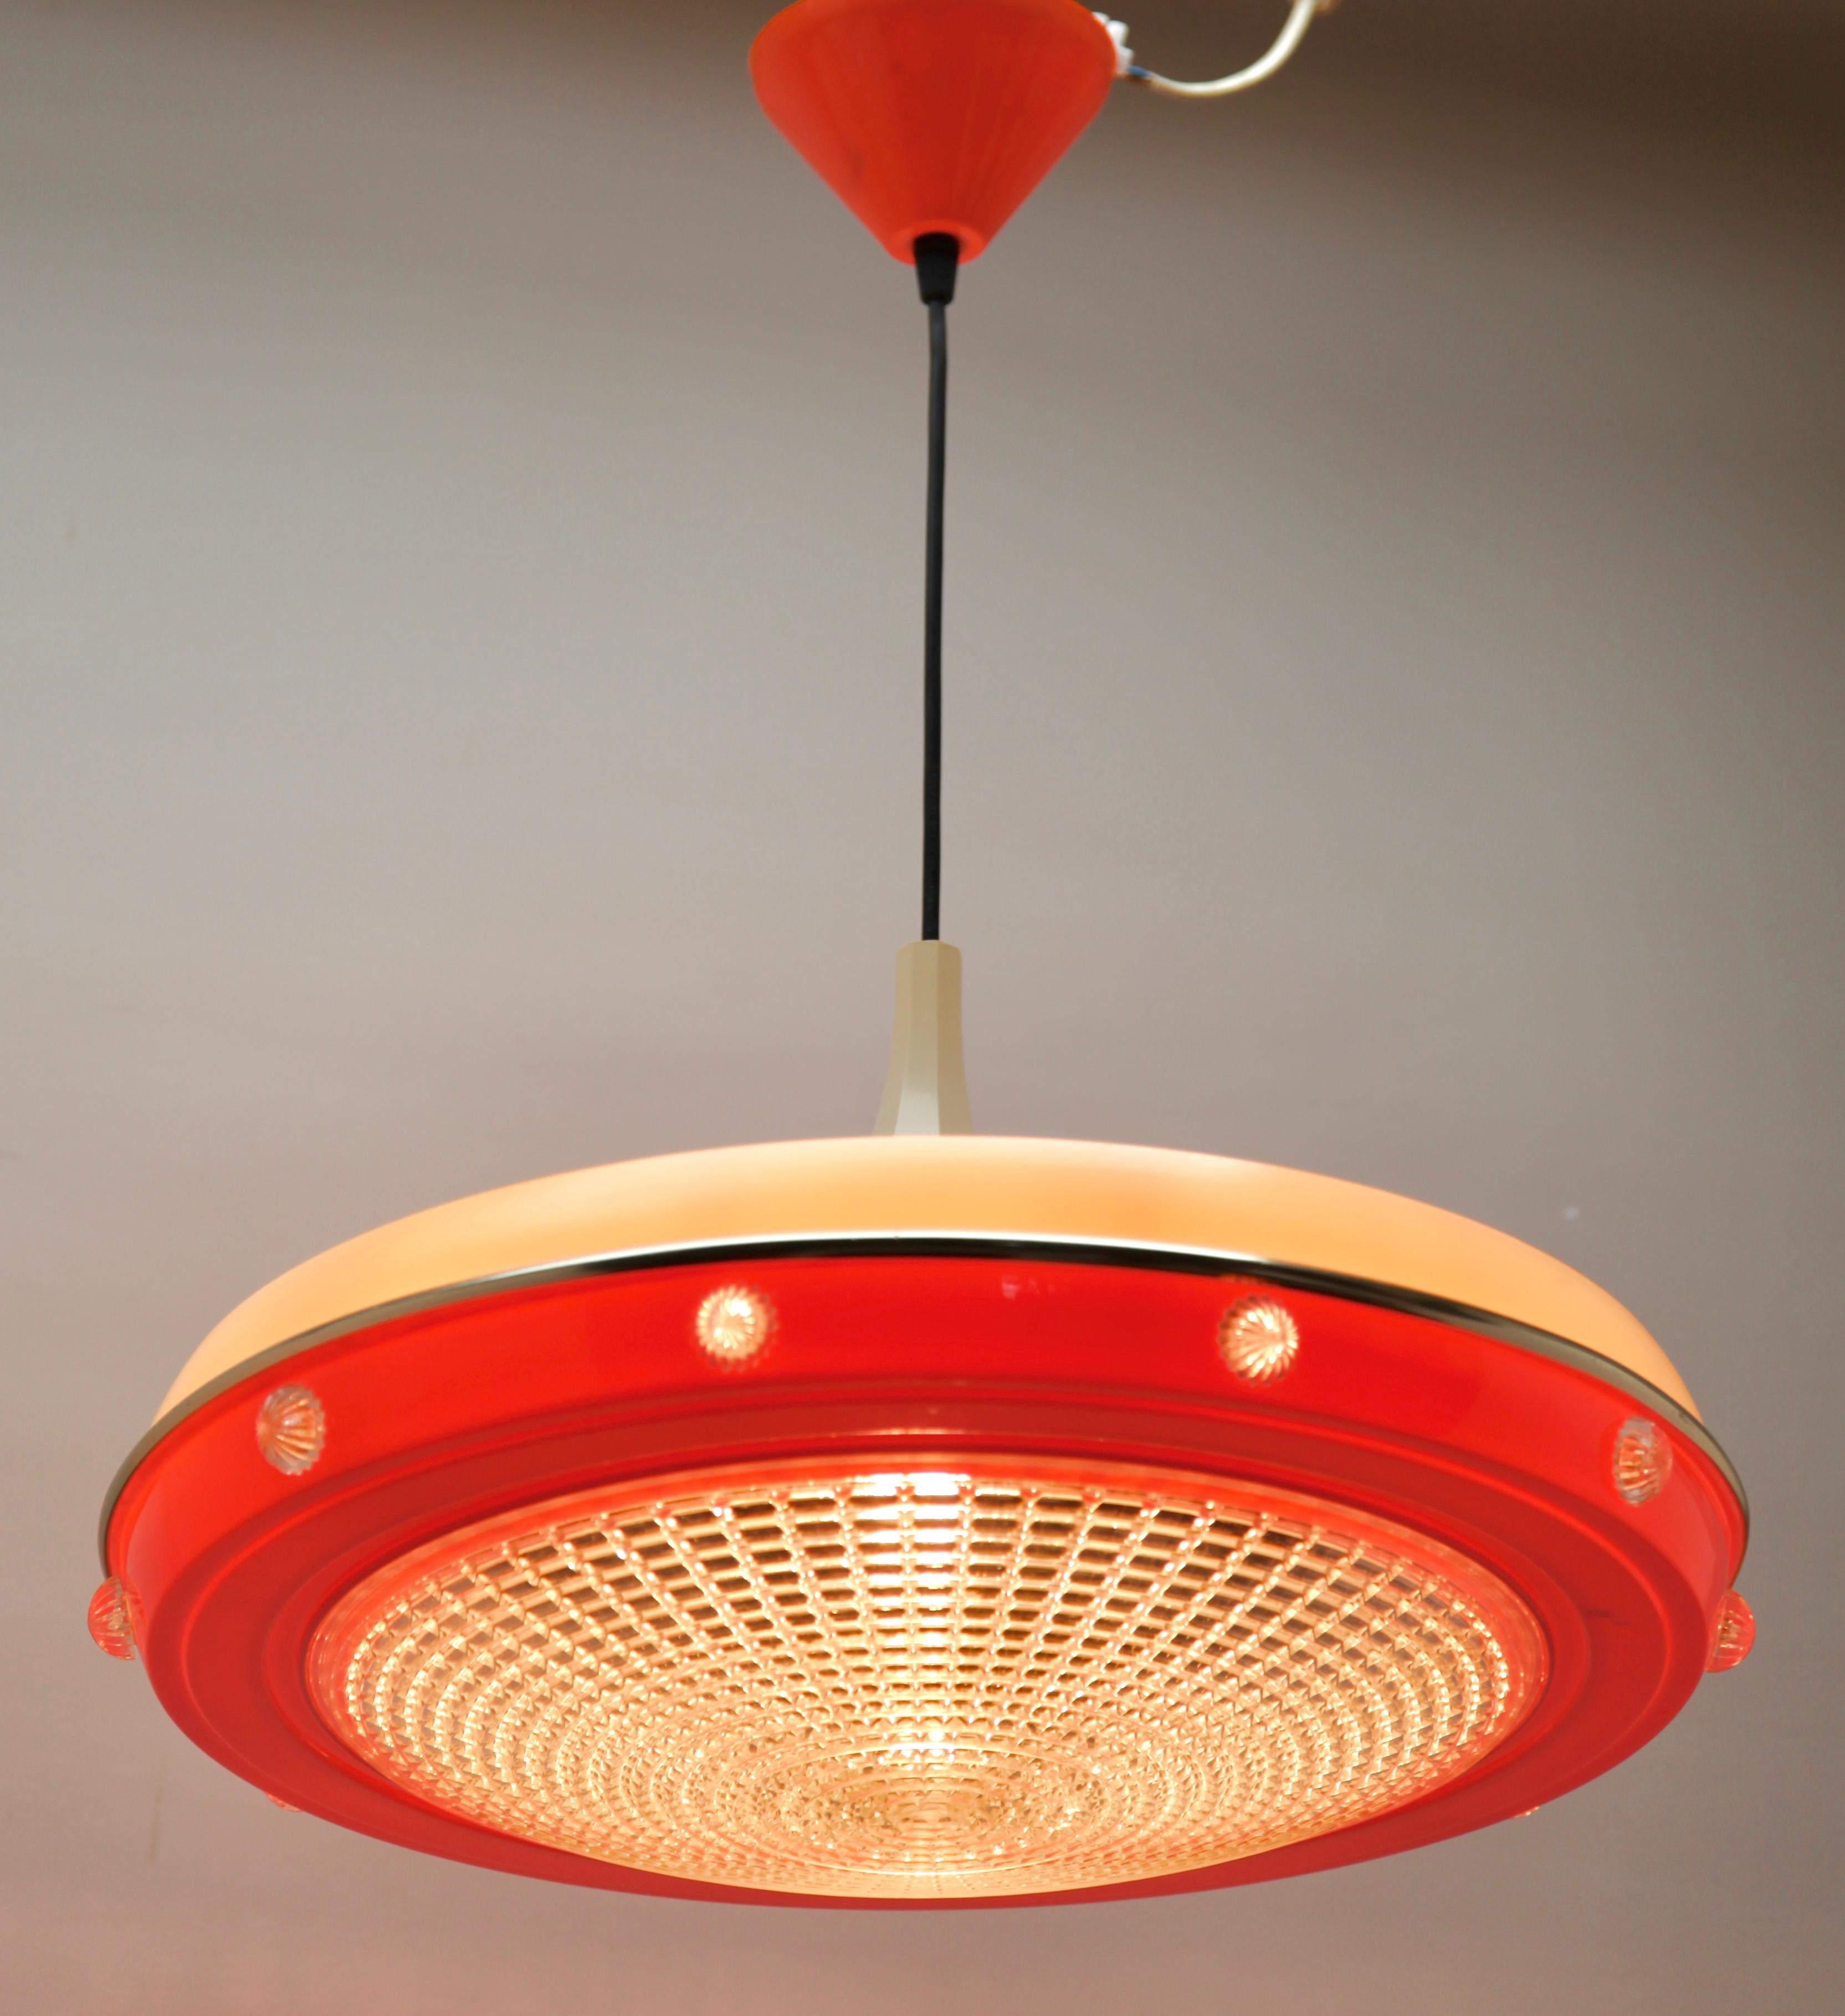 Hanging pendant light from the late 1960s designed in the Scandinavian style and Acrylic Shade 
Its Classic modernist form and simplicity in design, make it an iconic example of midcentury home lighting.
Size shade: Diameter 17.71 -inch